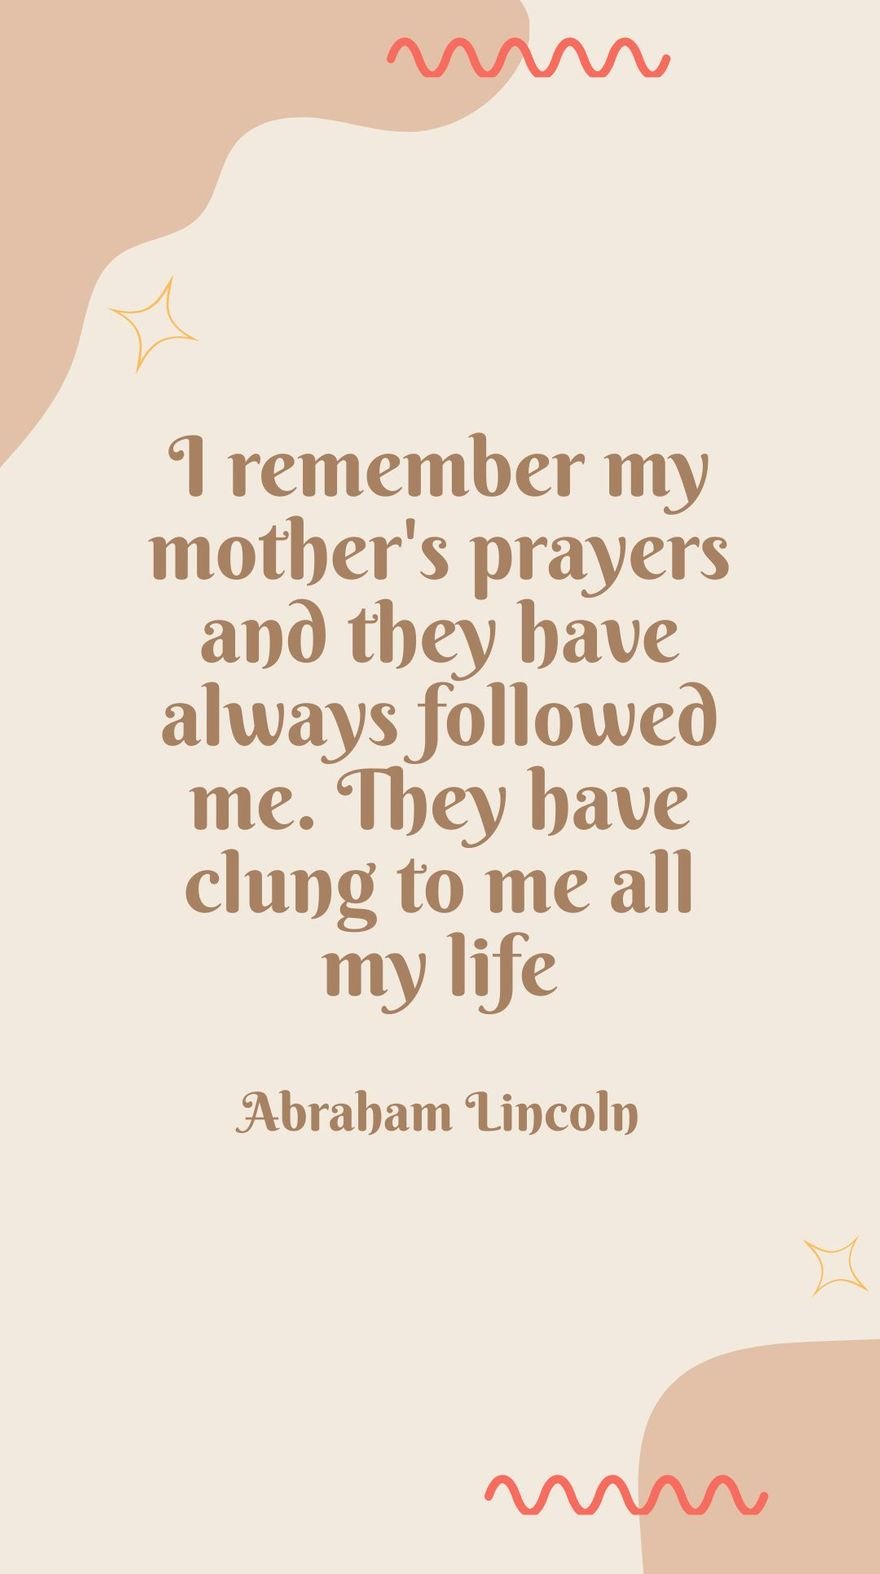 Abraham Lincoln - I remember my mother's prayers and they have always followed me. They have clung to me all my life. 